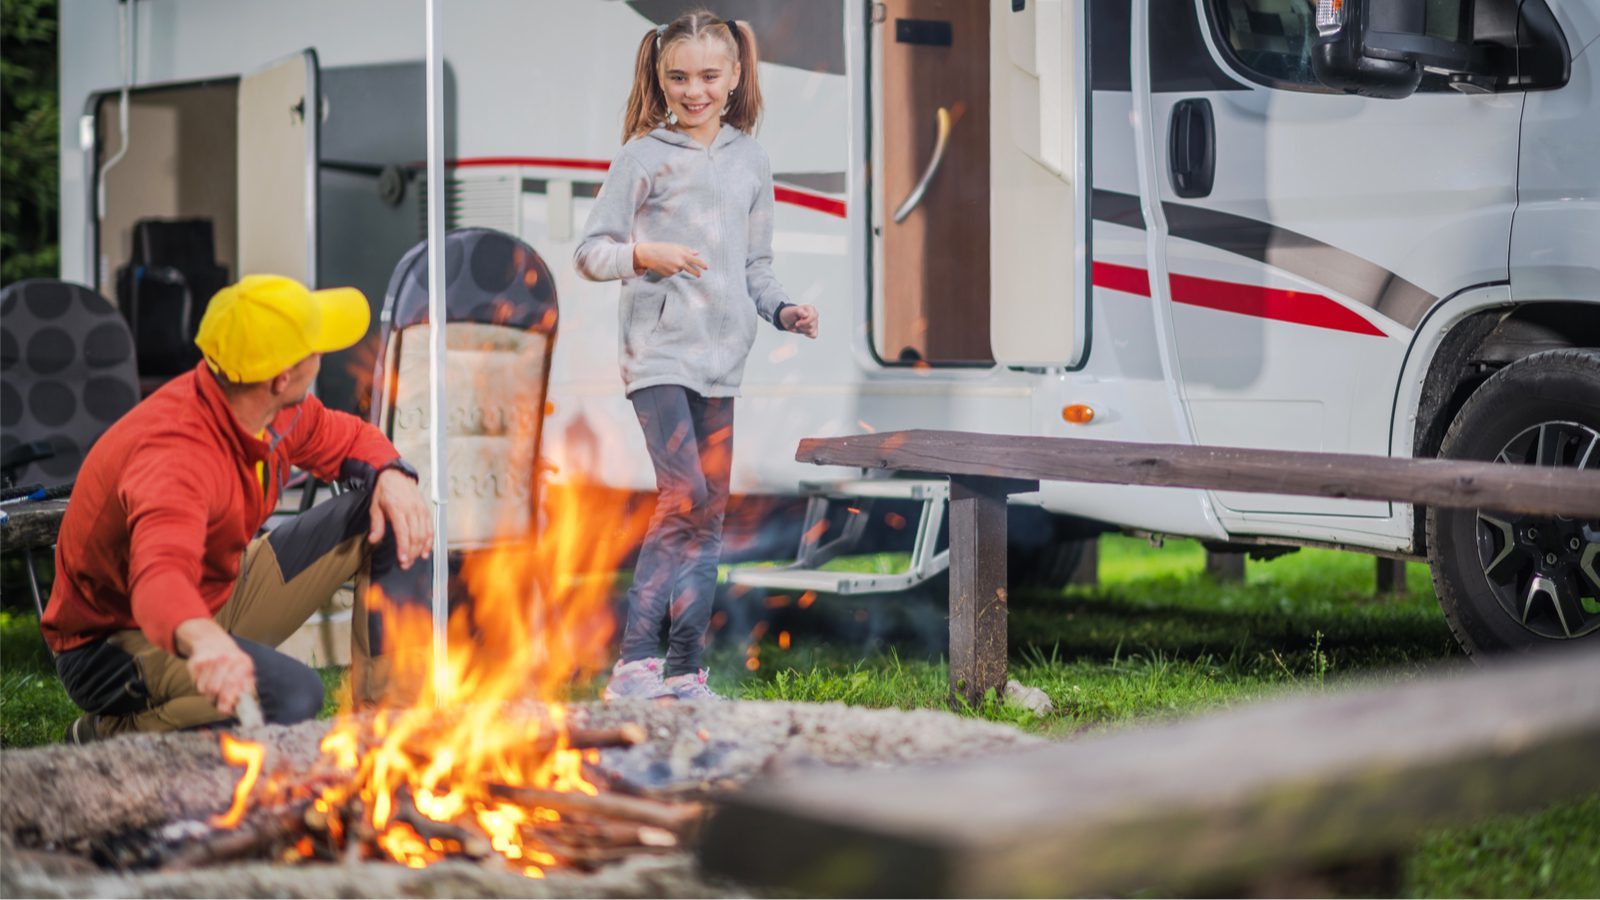 Best Campgrounds and RV Parks for Families (2022)